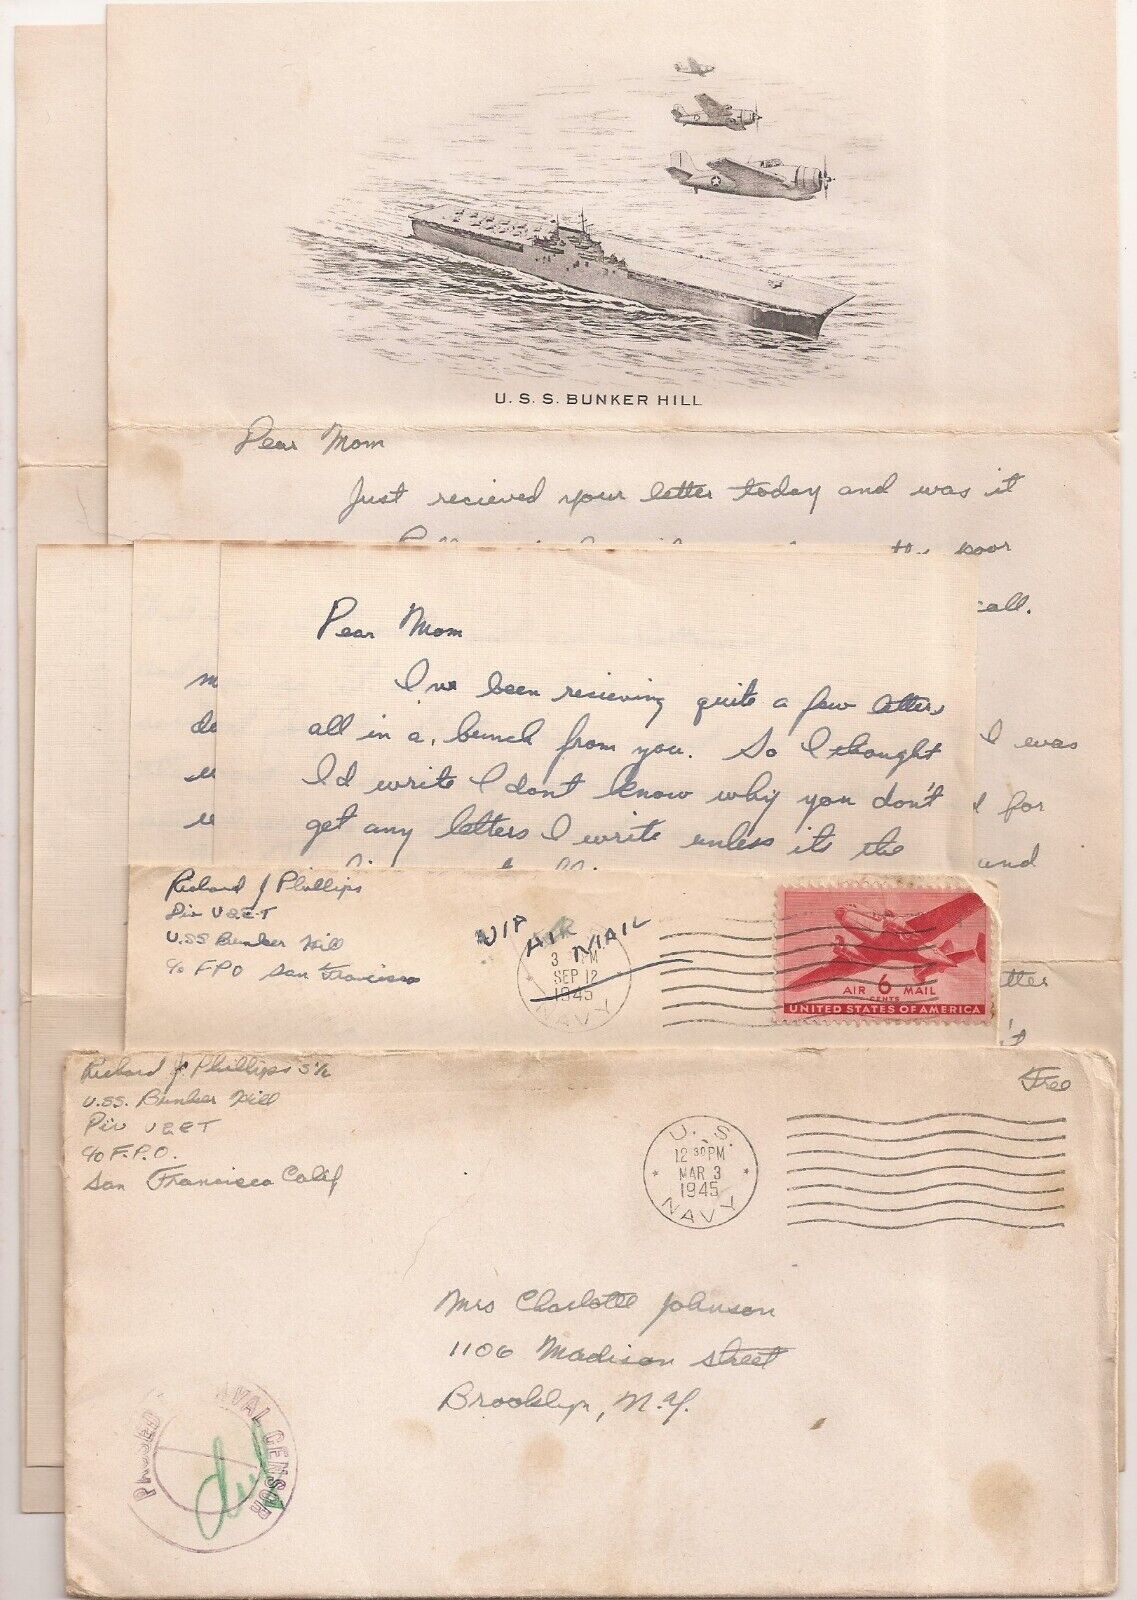 WWII Navy Letters. U.S.S. Bunker Hill. Iwo Jima. Survived 1945 Kamikaze Attack.